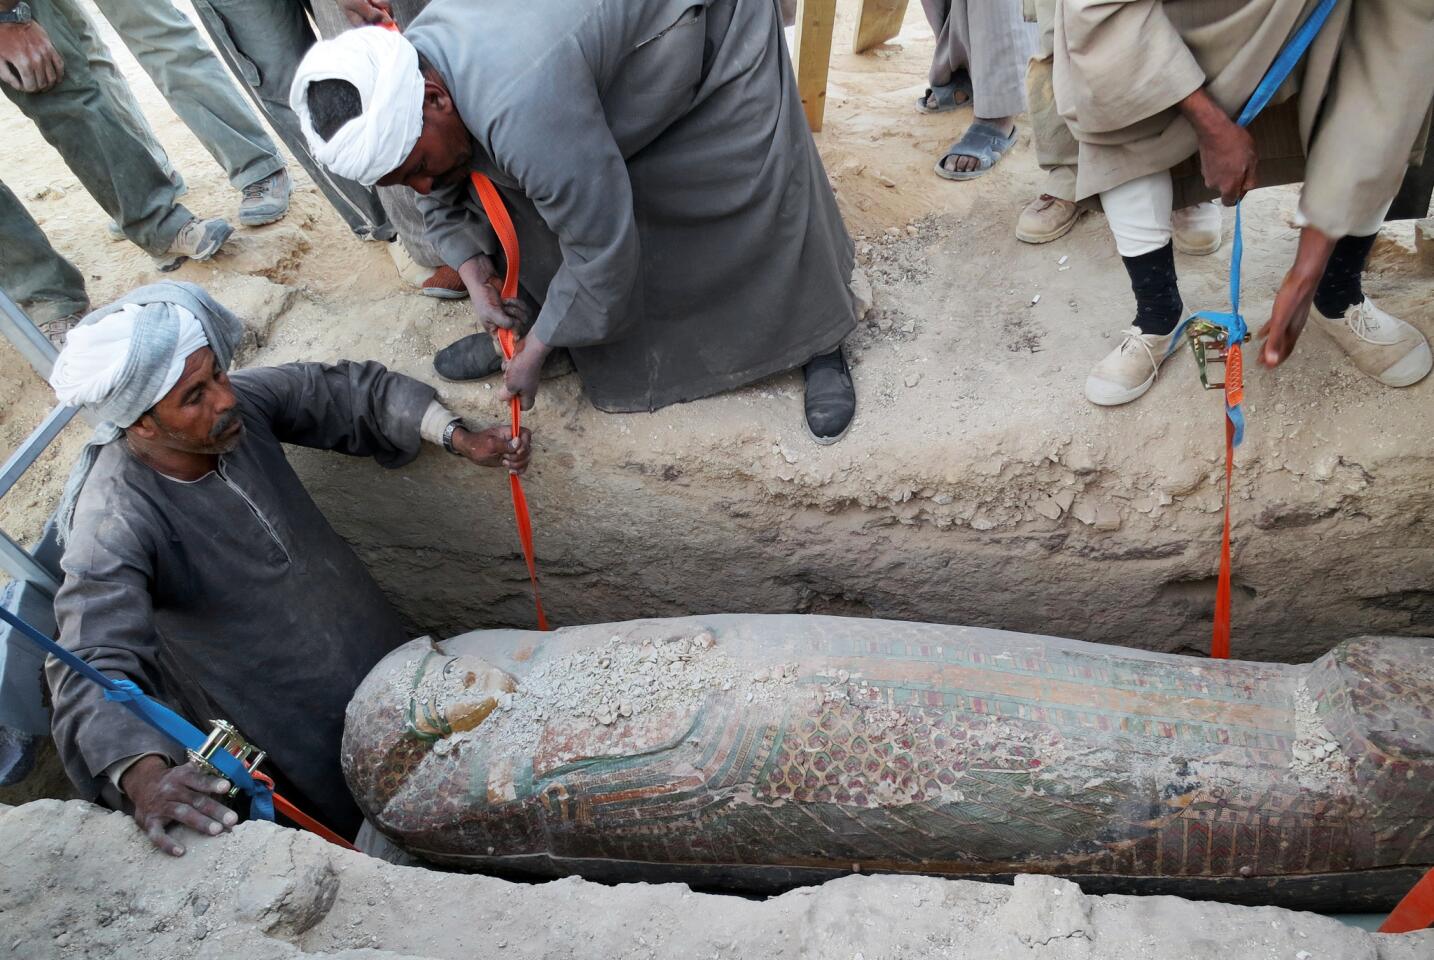 Workers lift a 3,600-year-old wooden sarcophagus from the ground in the ancient city of Luxor, Egypt.